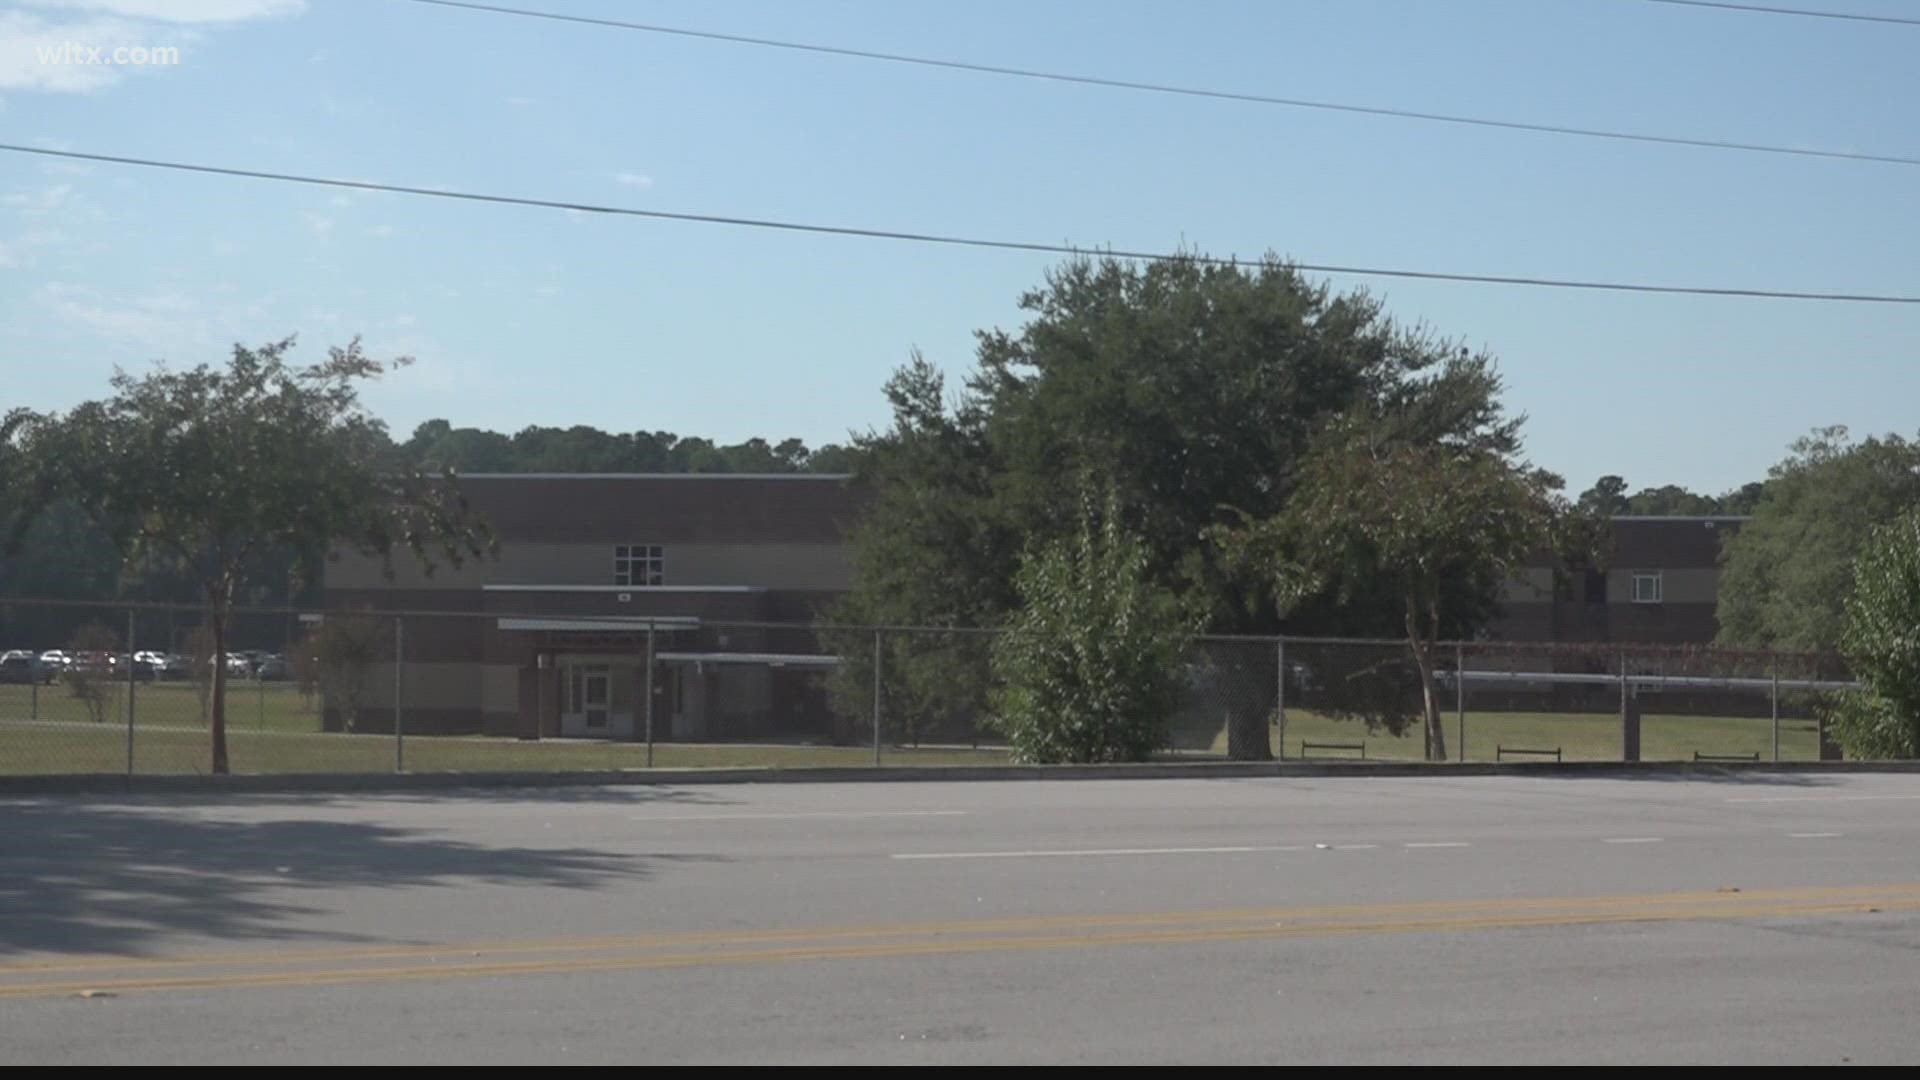 The $190M bond referendum will fund school projects throughout the district.